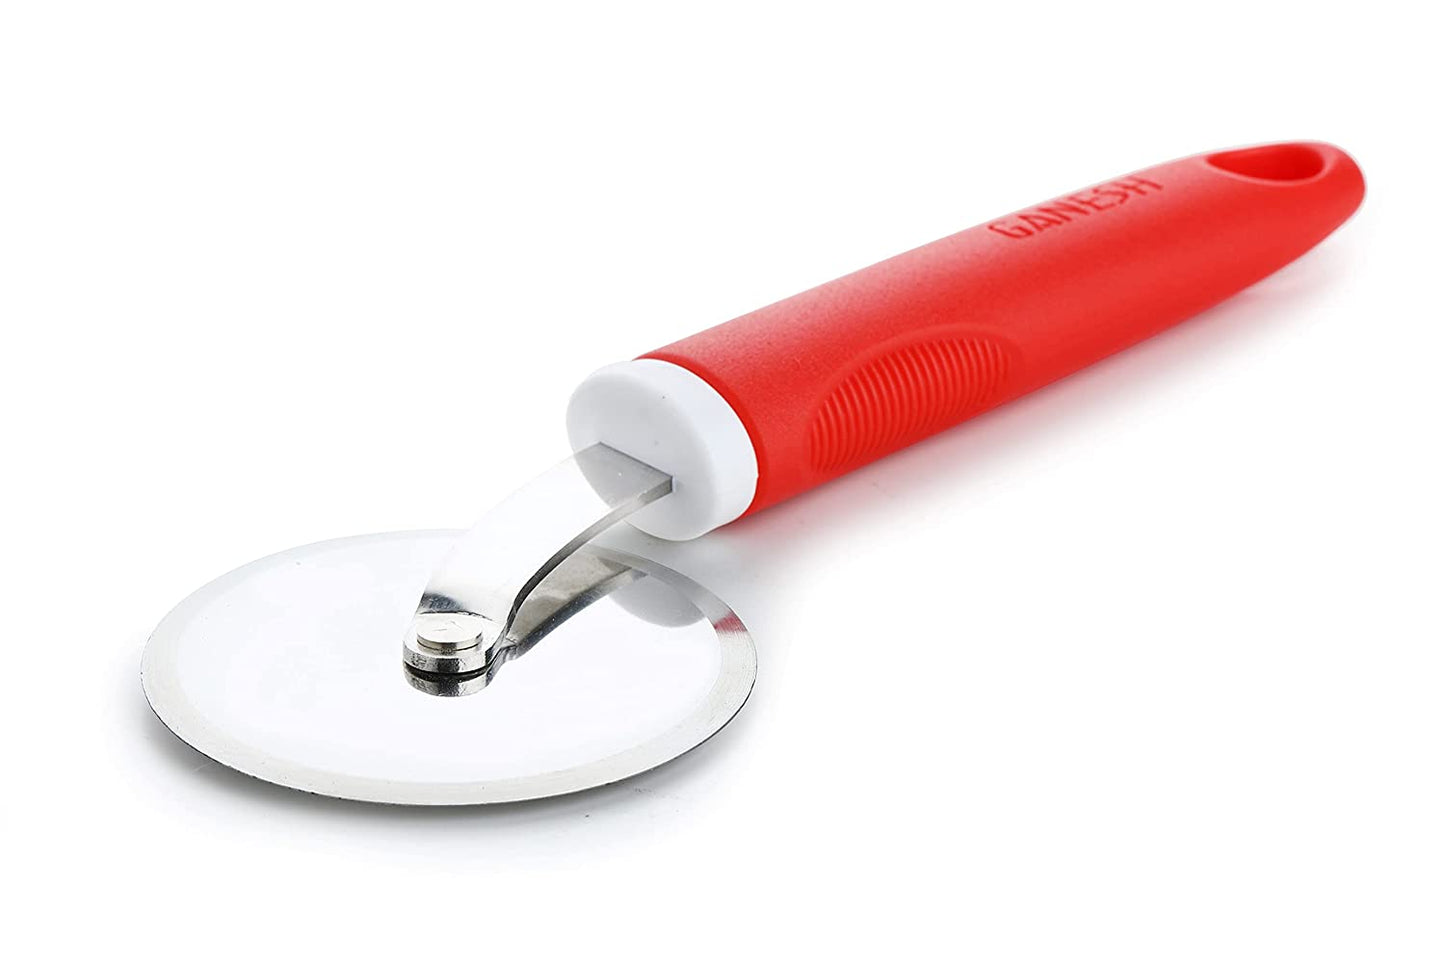 Ganesh PIZZA / PASTRY CUTTER Wheel Pizza Cutter (Stainless Steel)